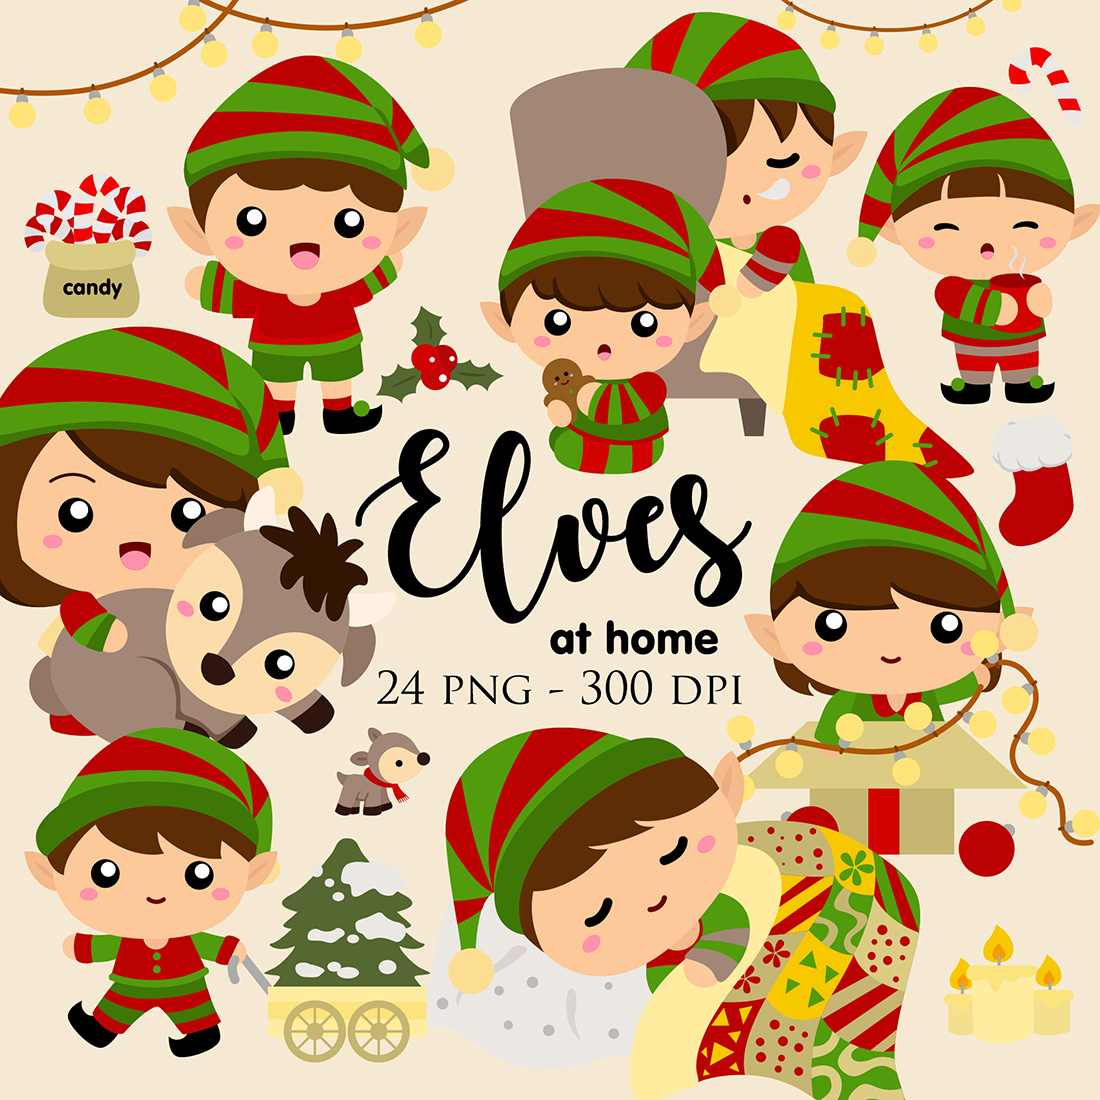 Colorful Christmas Elf Kids Girl Boy Character At Home Cartoon Illustration Vector Clipart Sticker Decoration Background cover image.